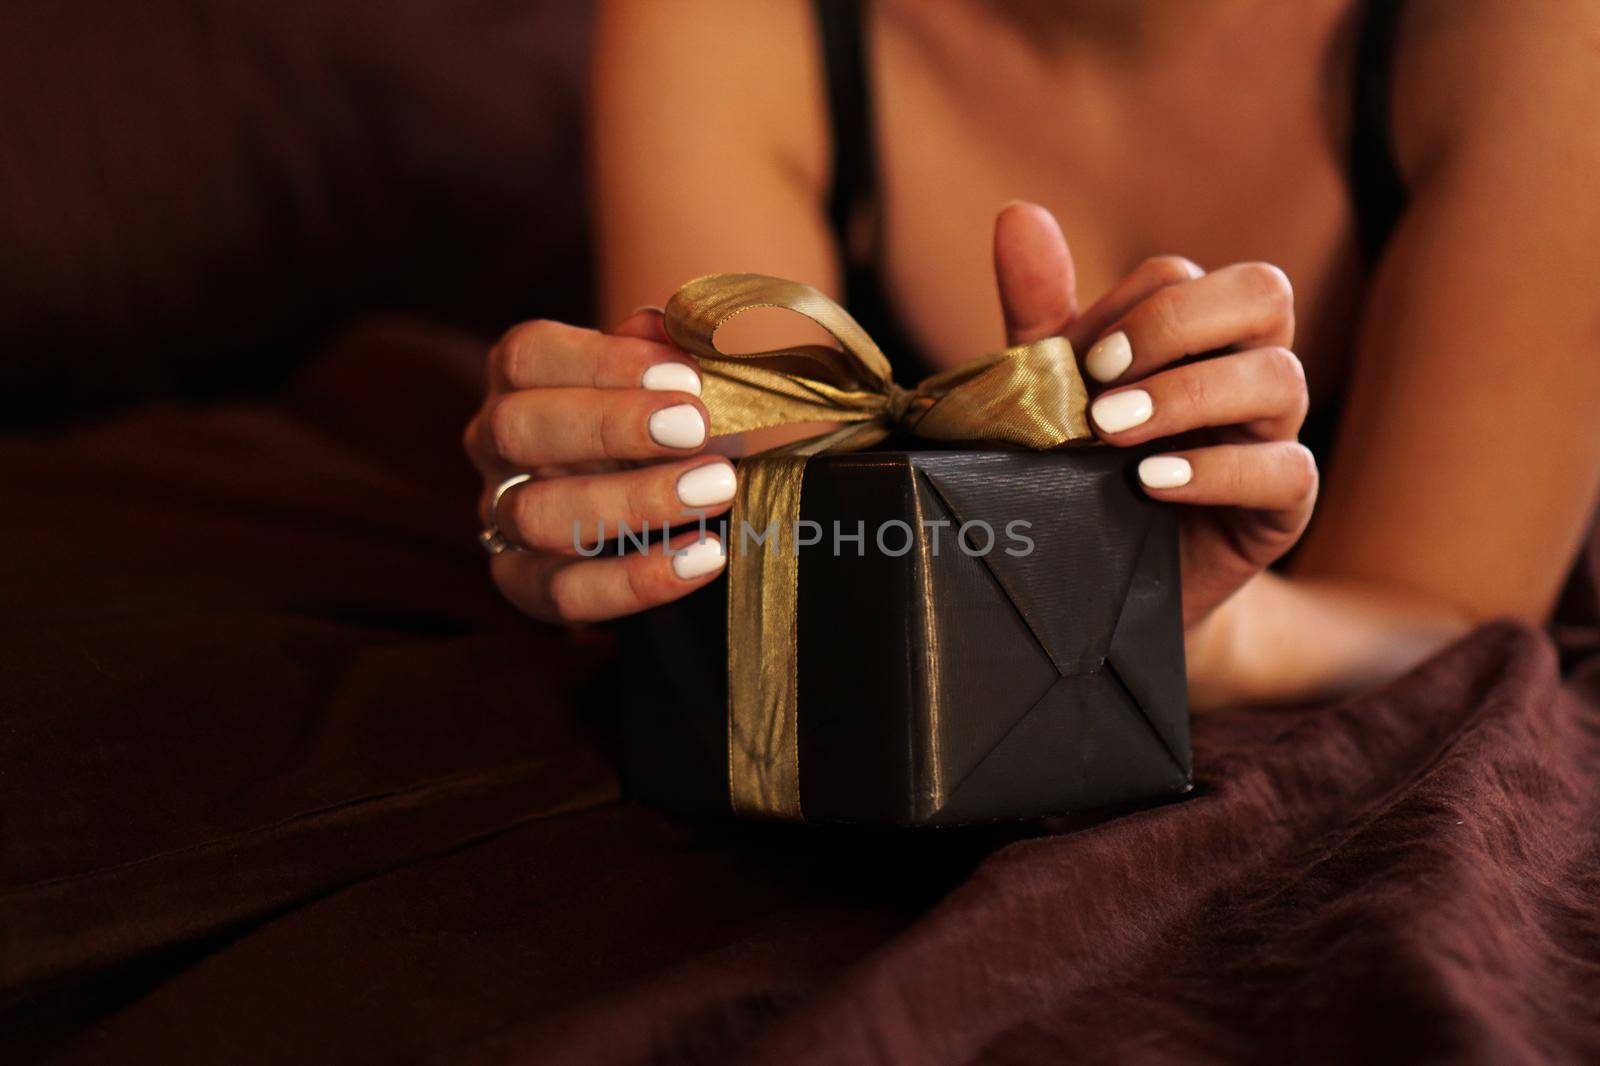 The woman opens a gift in a black box with a gold ribbon by natali_brill